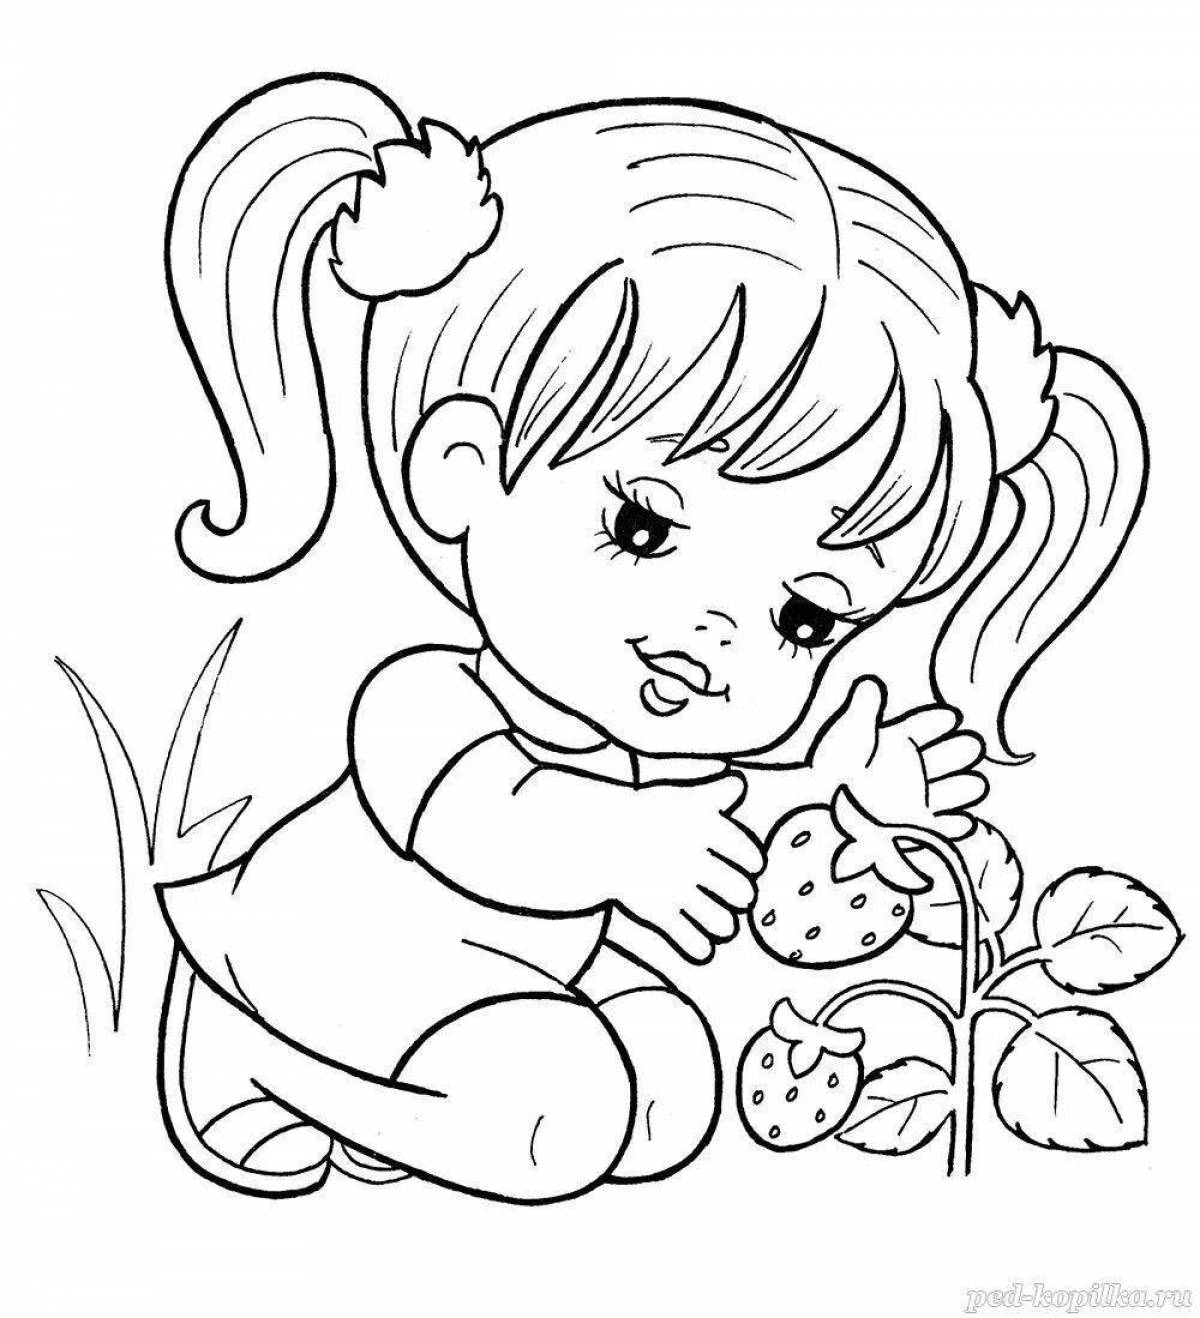 Color-frenzy coloring page for 4 year olds in kindergarten